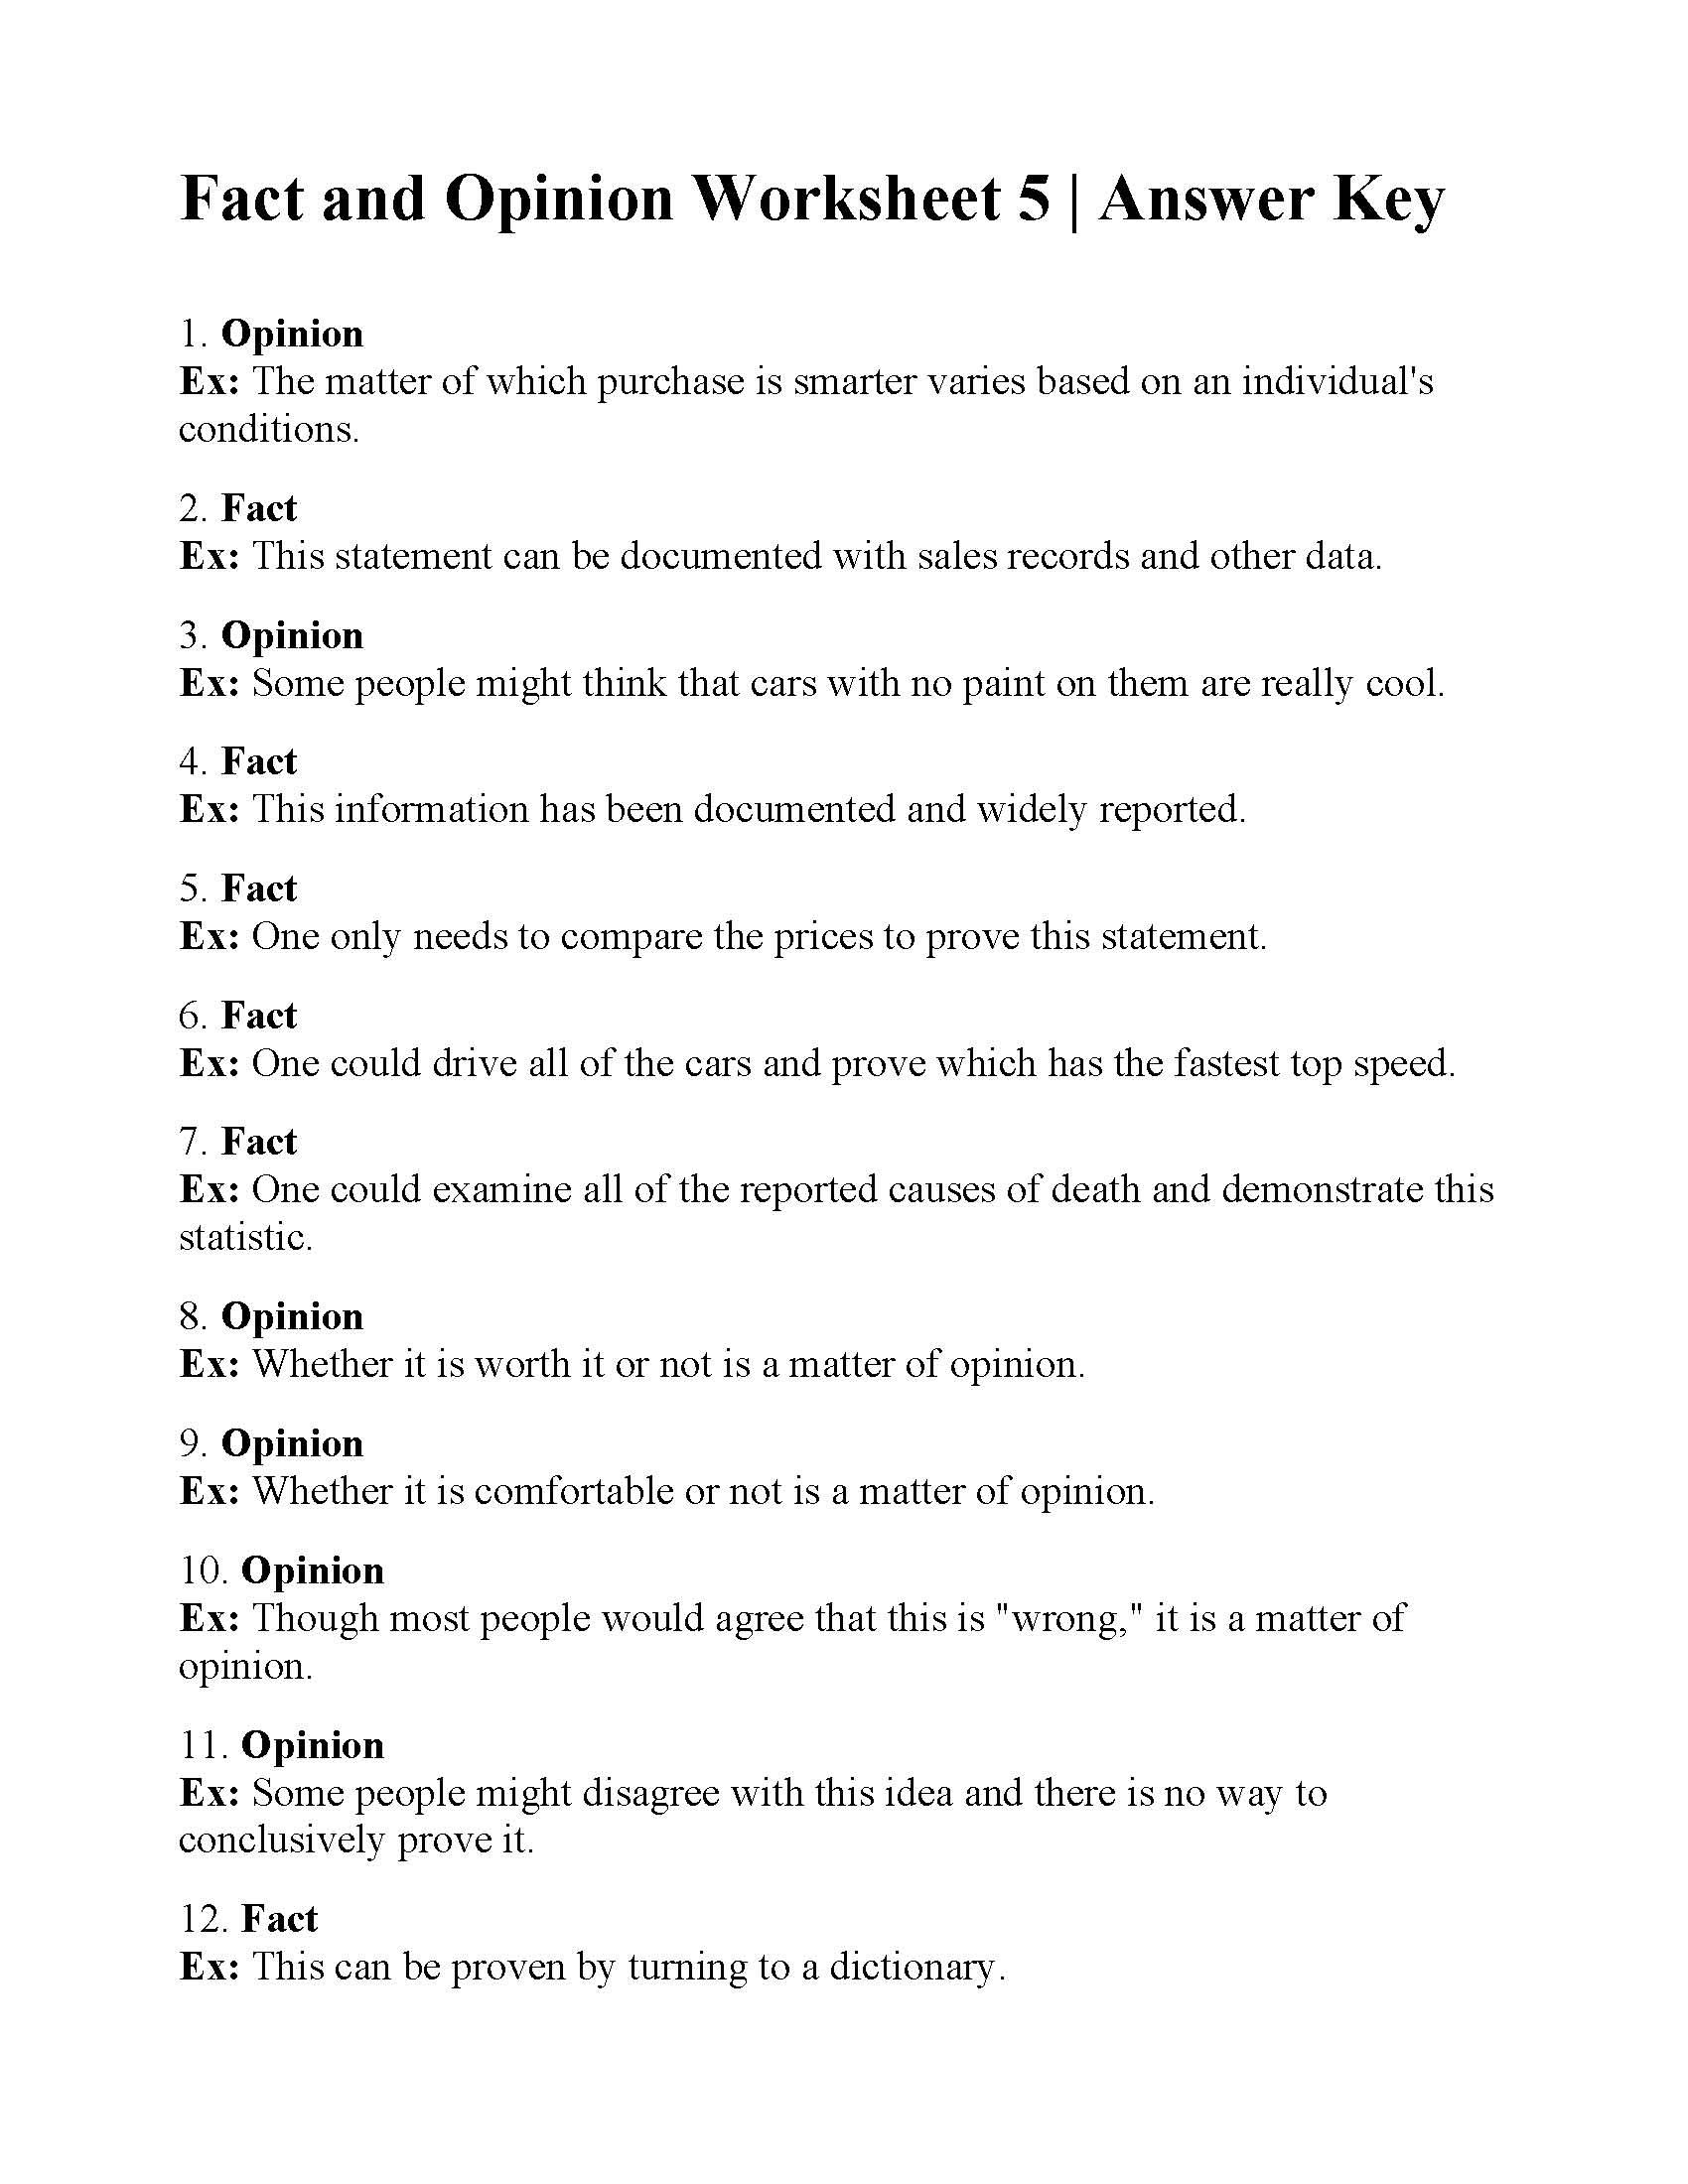 This is a preview image of Fact and Opinion Worksheet 5. Click on it to enlarge it or view the source file.